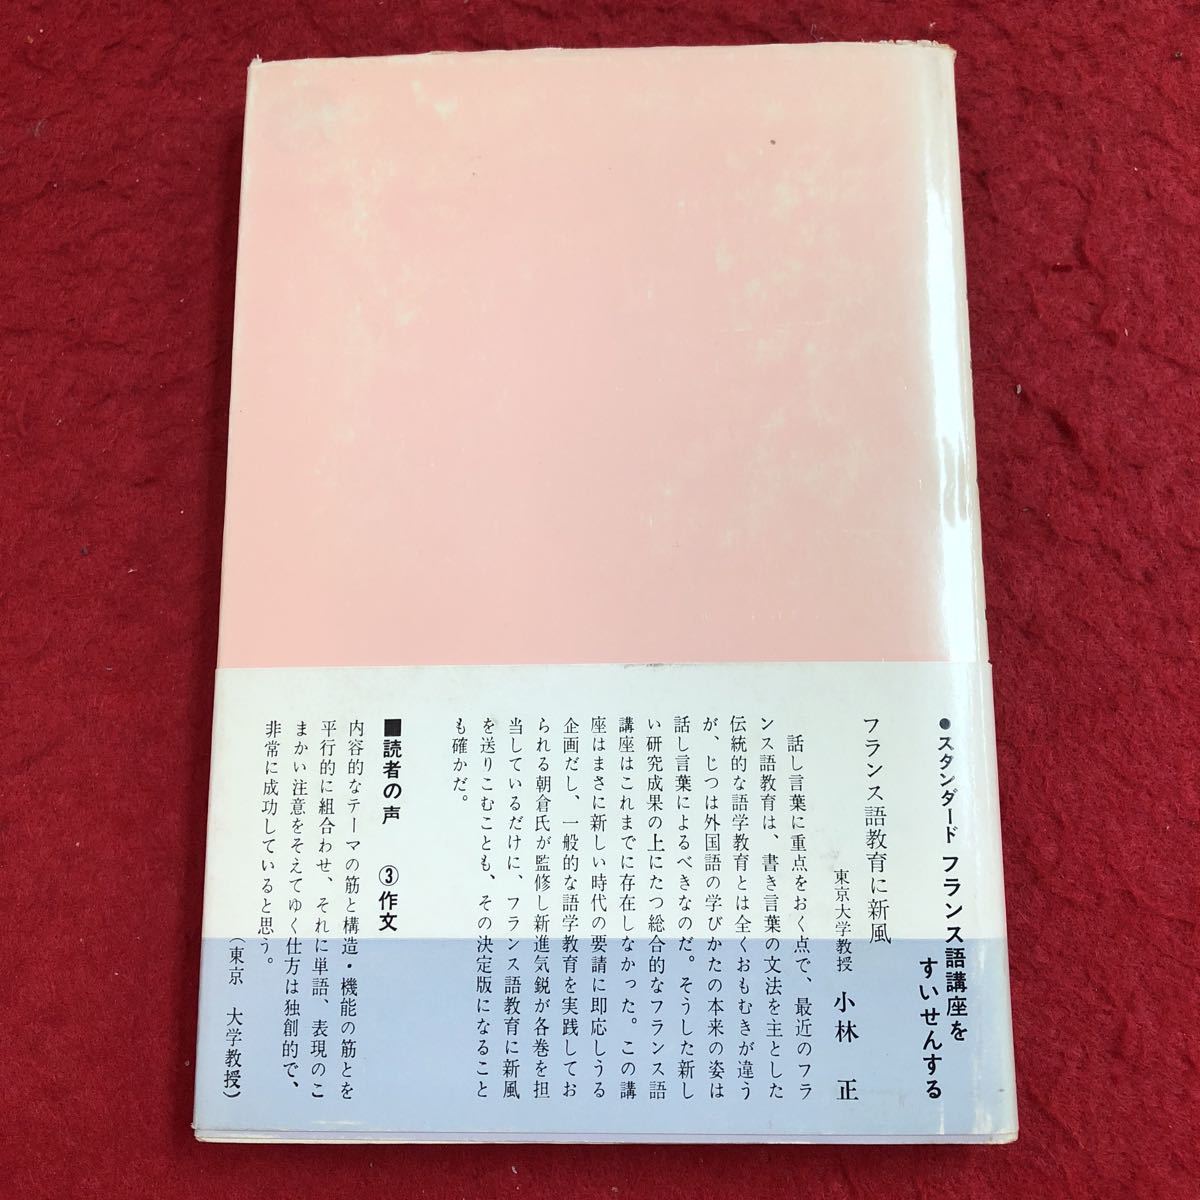 M6e-031 standard French course 3 composition author Fukui . man 1974 year 4 month 1 day 3 version issue large . pavilion bookstore French teaching material grammar single language table reality life article 